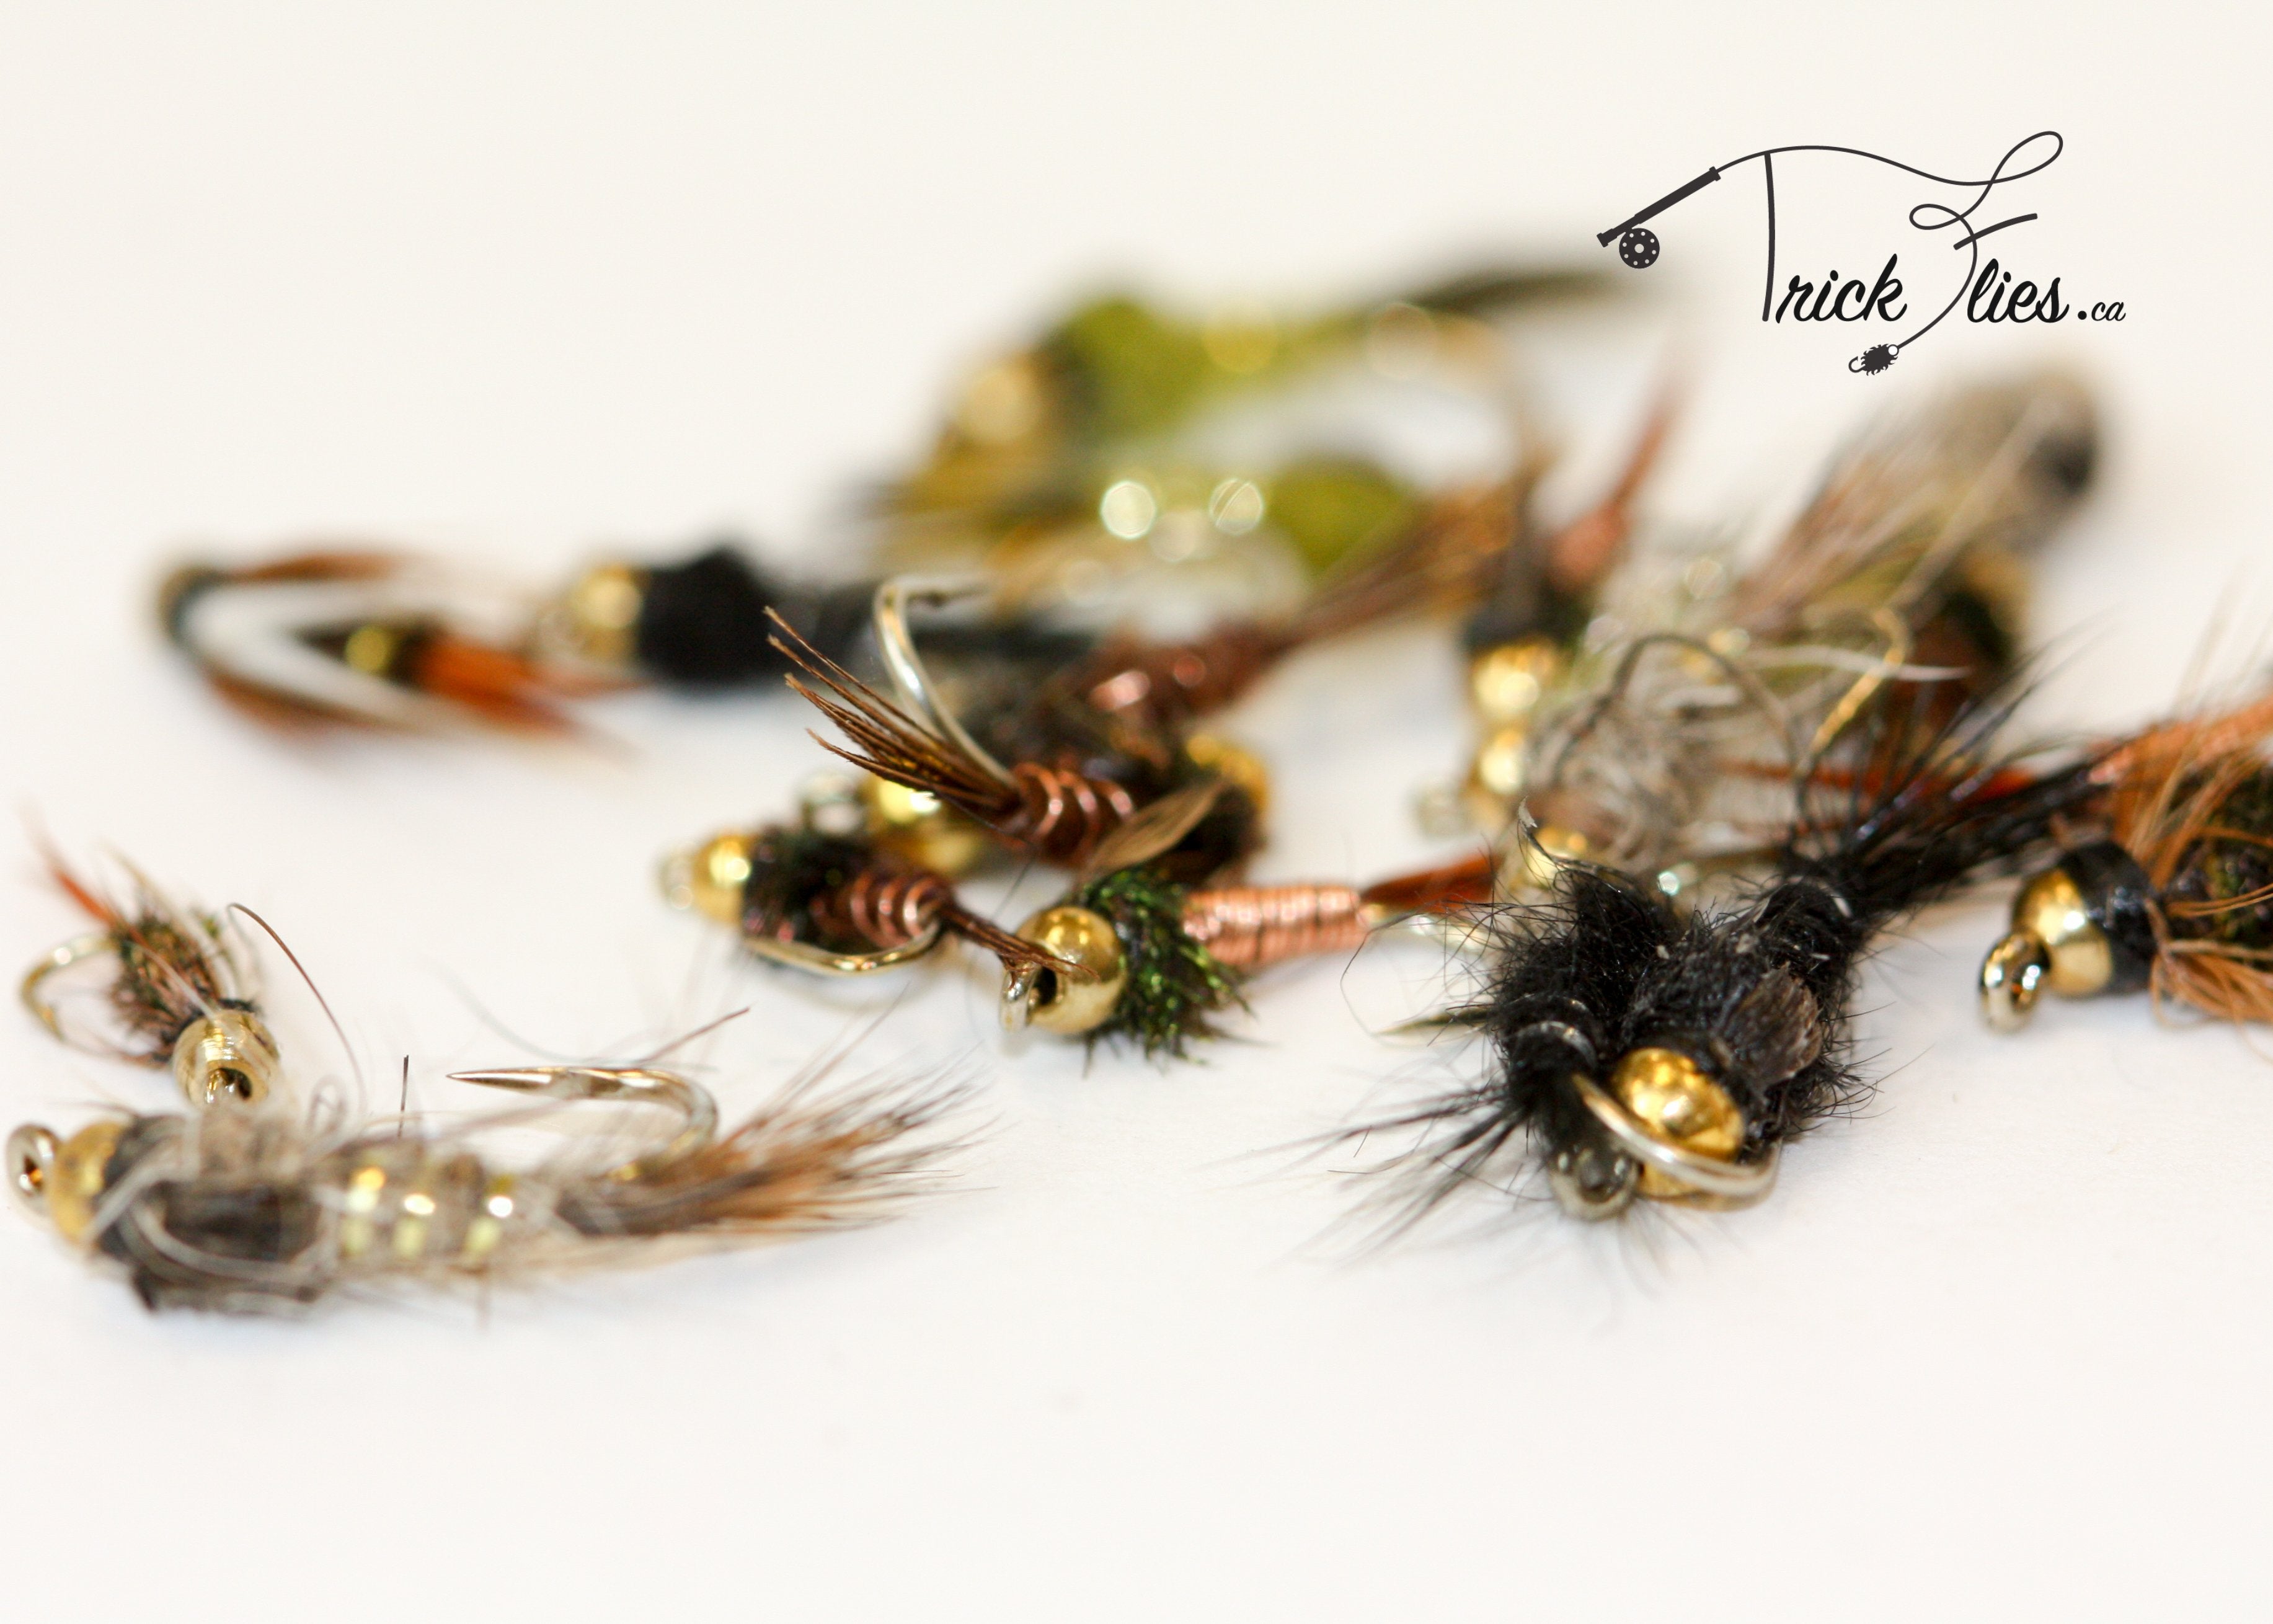 Tungsten Beadhead Nymph 22 Fly Collection